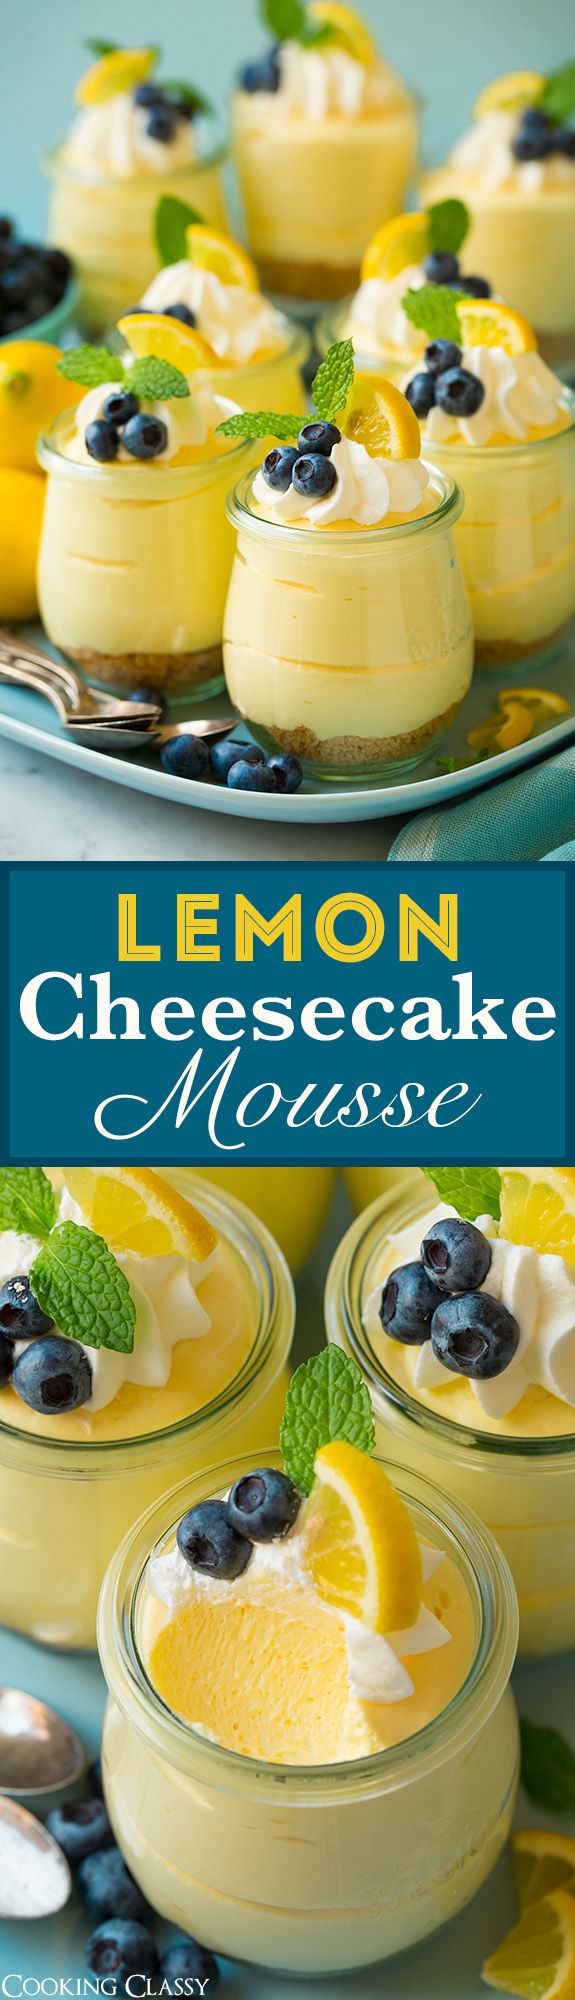 Make this delicious lemon cheesecake mousse with just three ingredients. The recipe of this low carb treat is easy. Check Out!